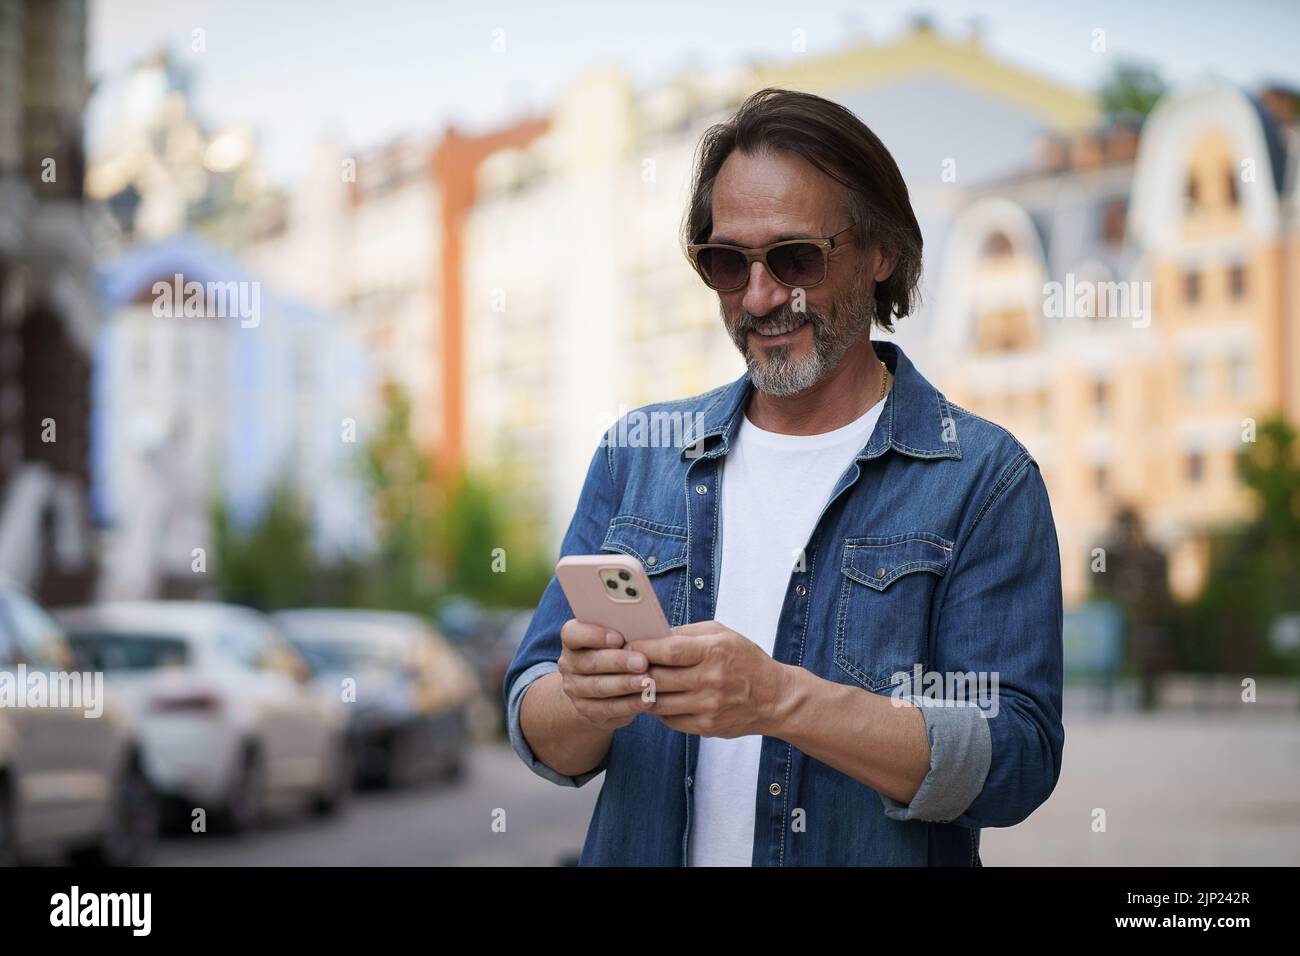 Texting or posting in social media post, photo mature handsome man with smartphone outdoors wearing denim shirt and sunglasses. Handsome middle aged man with grey hair making photos while traveling.  Stock Photo